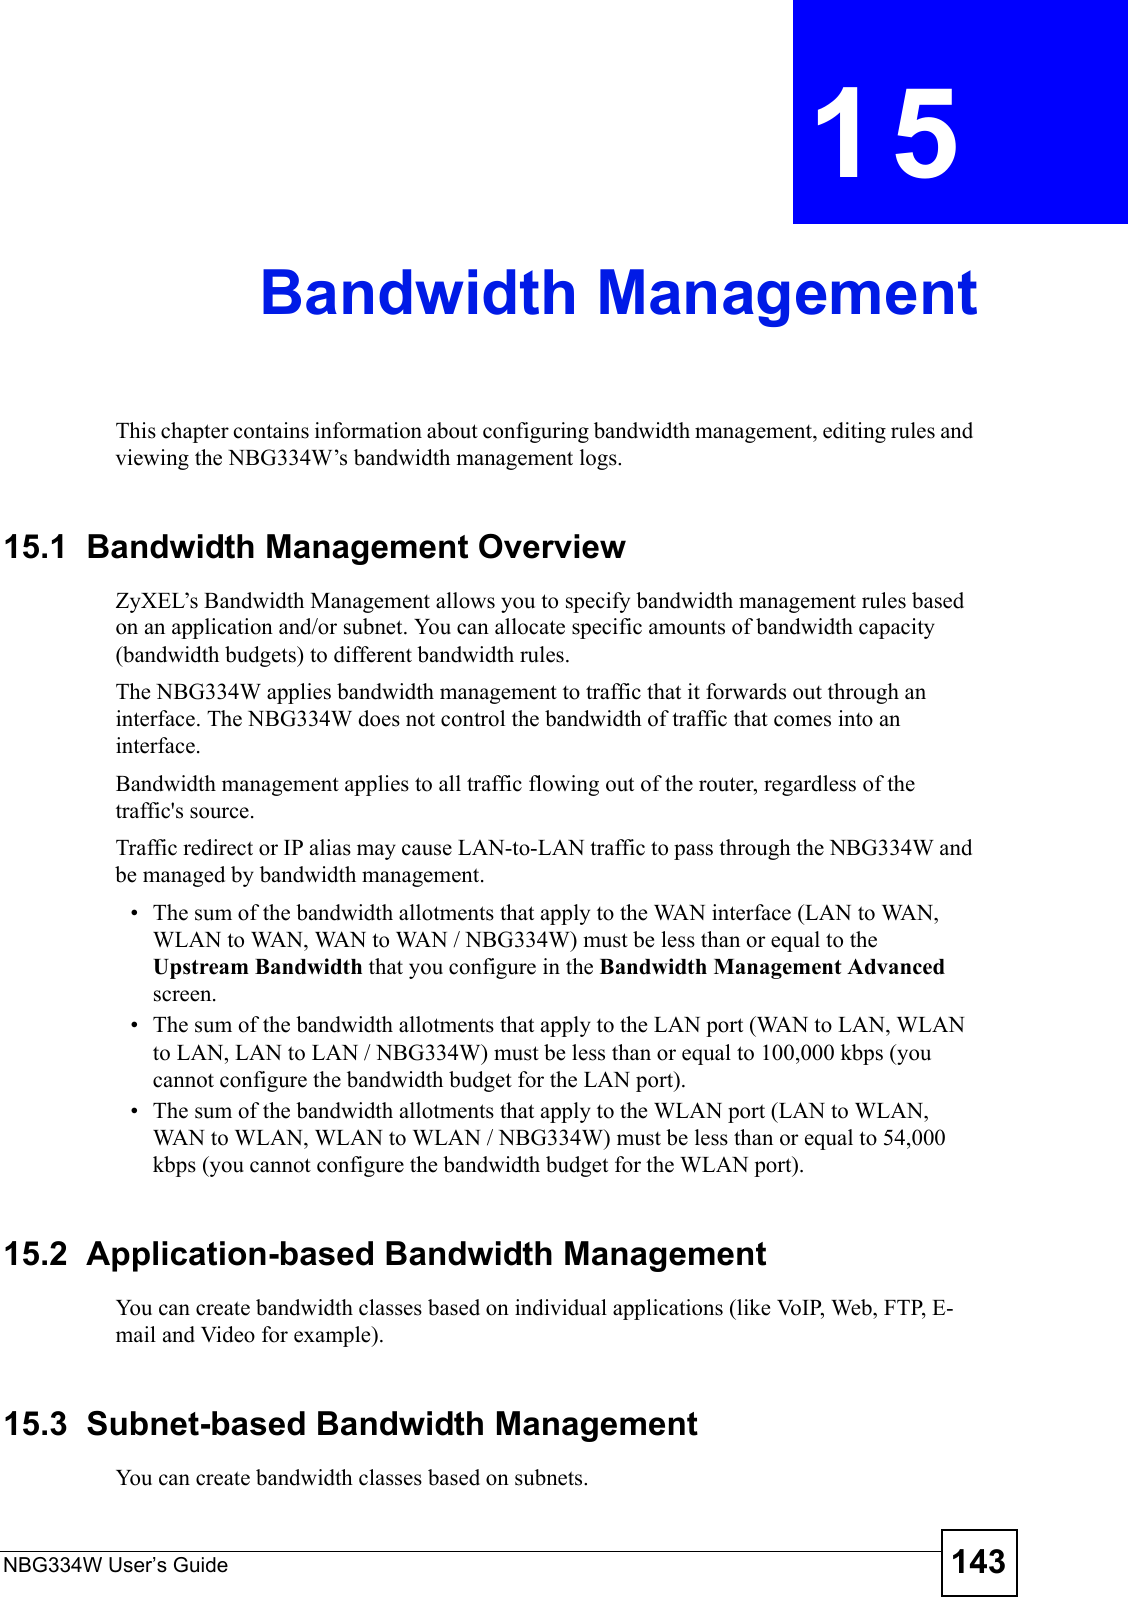 NBG334W User’s Guide 143CHAPTER  15 Bandwidth ManagementThis chapter contains information about configuring bandwidth management, editing rules and viewing the NBG334W’s bandwidth management logs.15.1  Bandwidth Management Overview ZyXEL’s Bandwidth Management allows you to specify bandwidth management rules based on an application and/or subnet. You can allocate specific amounts of bandwidth capacity (bandwidth budgets) to different bandwidth rules. The NBG334W applies bandwidth management to traffic that it forwards out through an interface. The NBG334W does not control the bandwidth of traffic that comes into an interface.Bandwidth management applies to all traffic flowing out of the router, regardless of the traffic&apos;s source.Traffic redirect or IP alias may cause LAN-to-LAN traffic to pass through the NBG334W and be managed by bandwidth management. • The sum of the bandwidth allotments that apply to the WAN interface (LAN to WAN, WLAN to WAN, WAN to WAN / NBG334W) must be less than or equal to the Upstream Bandwidth that you configure in the Bandwidth Management Advanced screen. • The sum of the bandwidth allotments that apply to the LAN port (WAN to LAN, WLAN to LAN, LAN to LAN / NBG334W) must be less than or equal to 100,000 kbps (you cannot configure the bandwidth budget for the LAN port). • The sum of the bandwidth allotments that apply to the WLAN port (LAN to WLAN, WAN to WLAN, WLAN to WLAN / NBG334W) must be less than or equal to 54,000 kbps (you cannot configure the bandwidth budget for the WLAN port). 15.2  Application-based Bandwidth ManagementYou can create bandwidth classes based on individual applications (like VoIP, Web, FTP, E-mail and Video for example).15.3  Subnet-based Bandwidth ManagementYou can create bandwidth classes based on subnets.